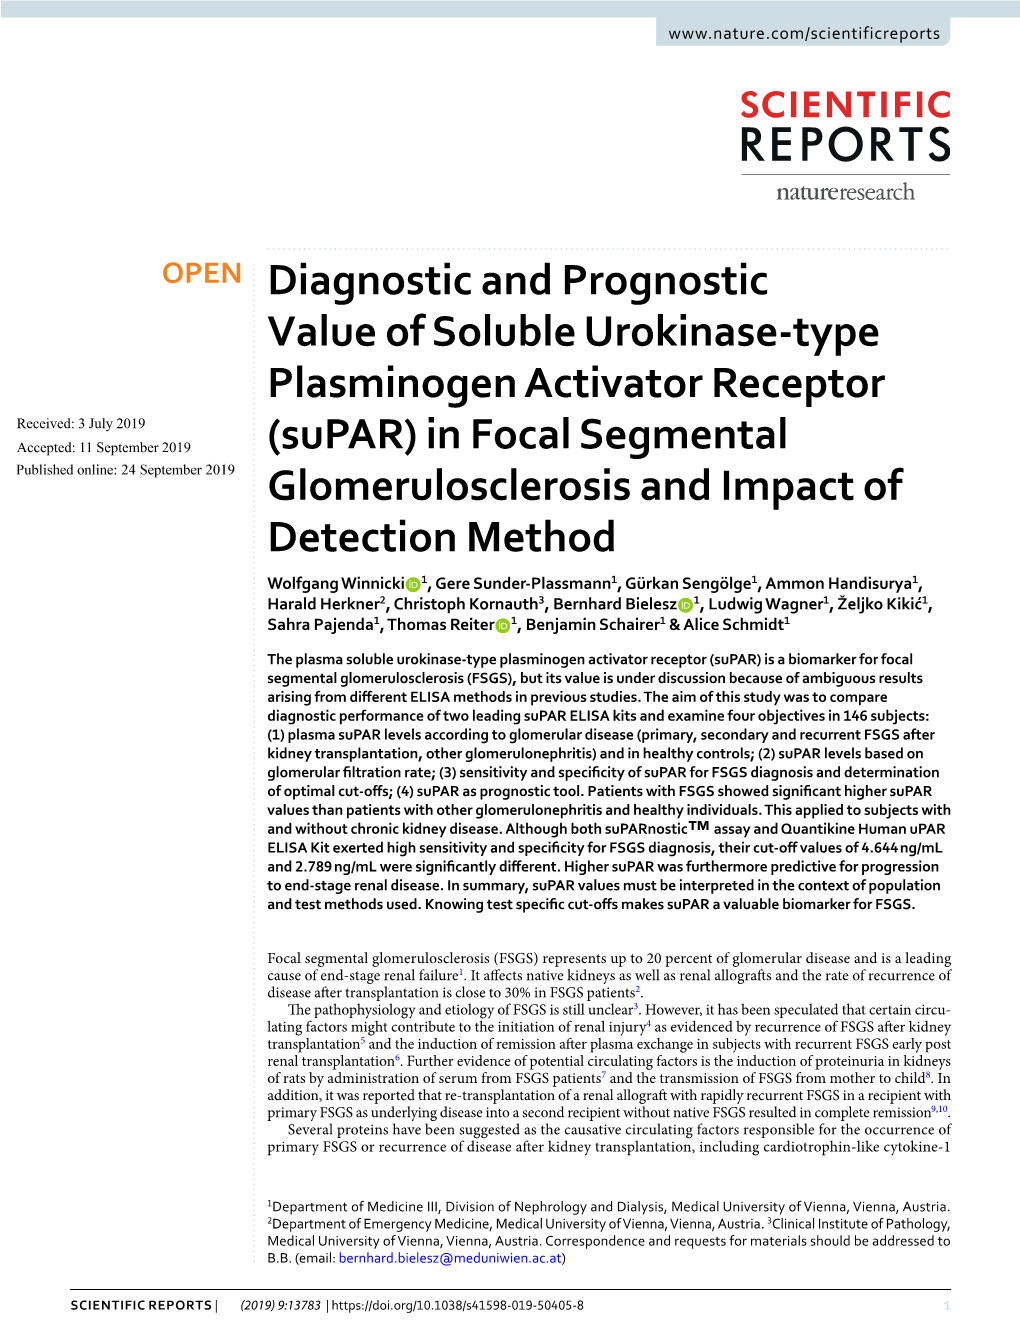 Diagnostic and Prognostic Value of Soluble Urokinase-Type